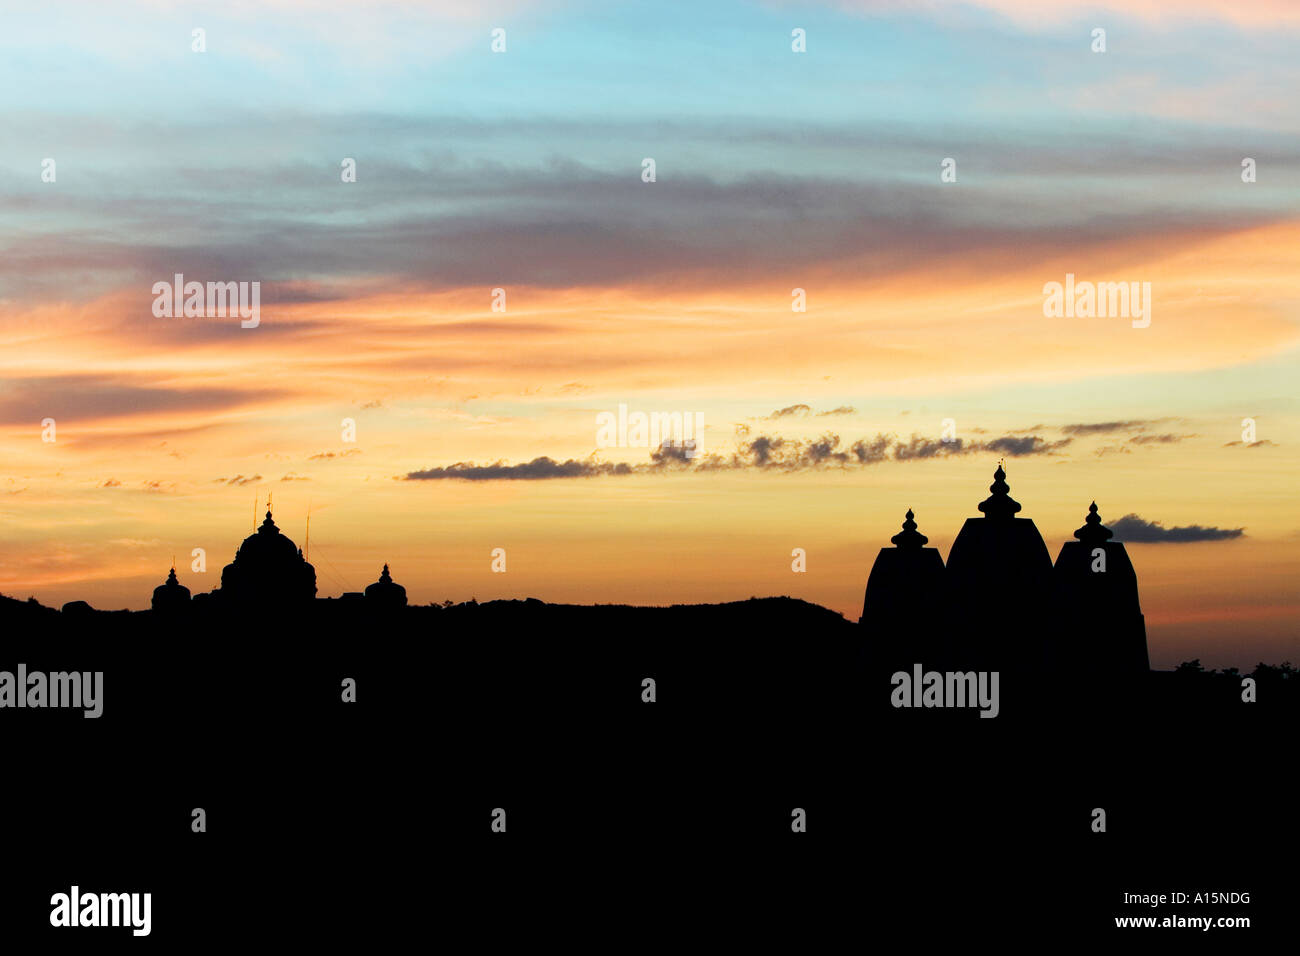 Silhouette profile of Indian ashram architecture against sunset at Puttaparthi, Southern India Stock Photo